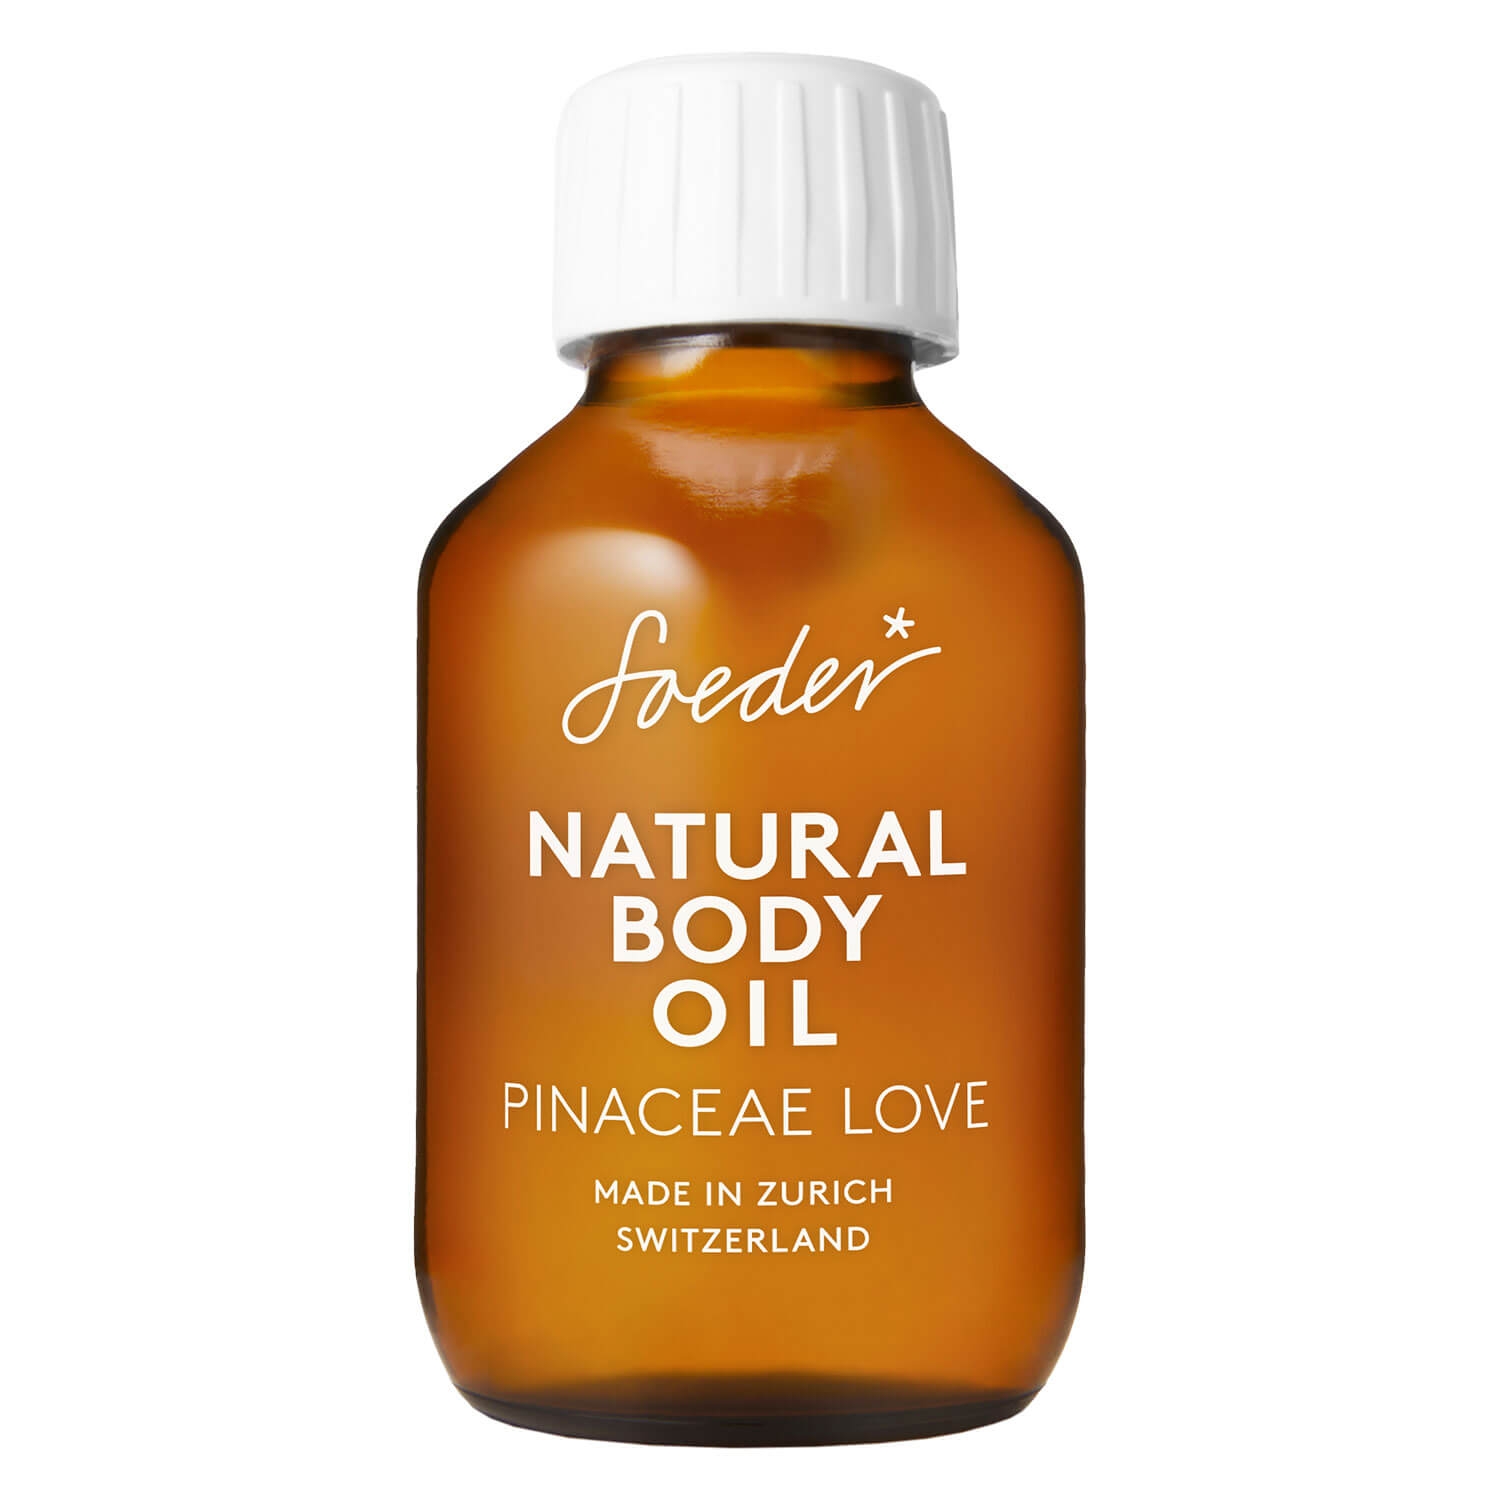 Product image from Soeder - Natural Body Oil Pinaceae Love